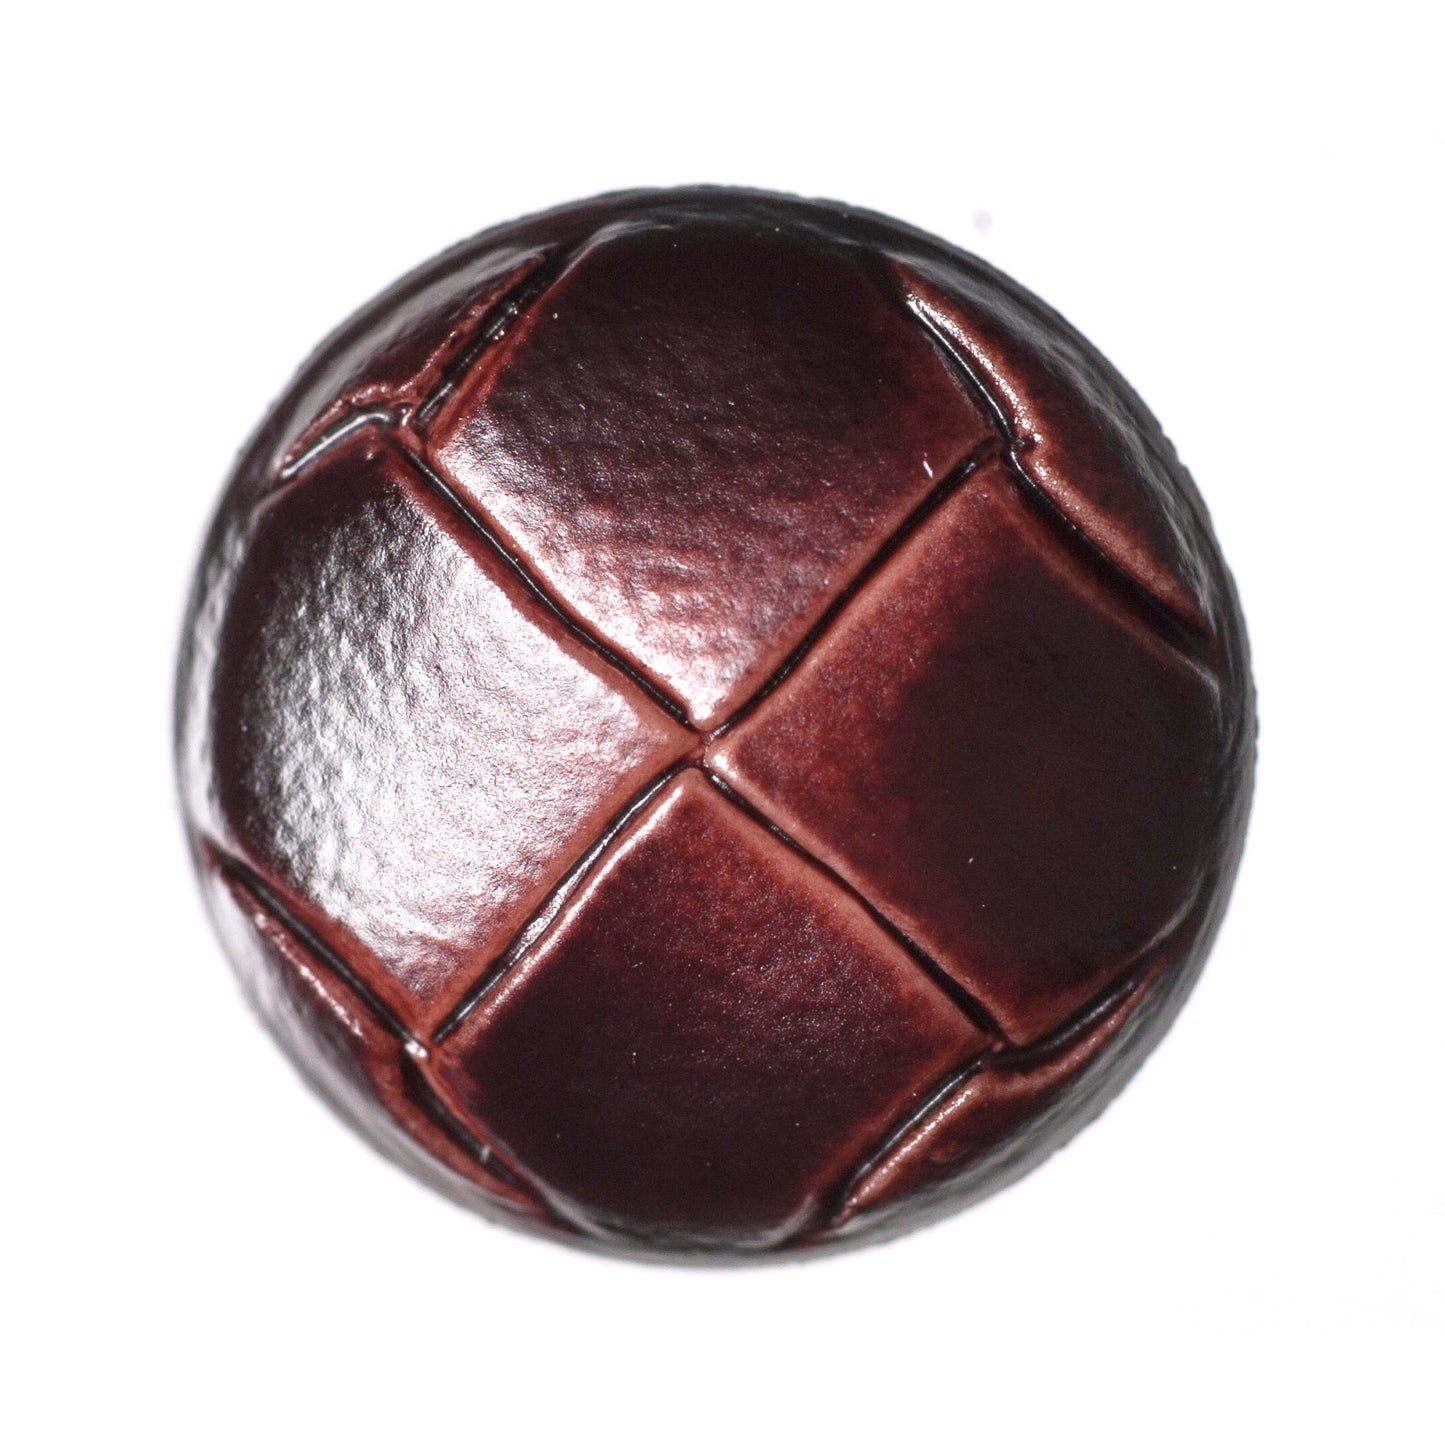 Imitation Leather Shank Button - 15mm - Brown